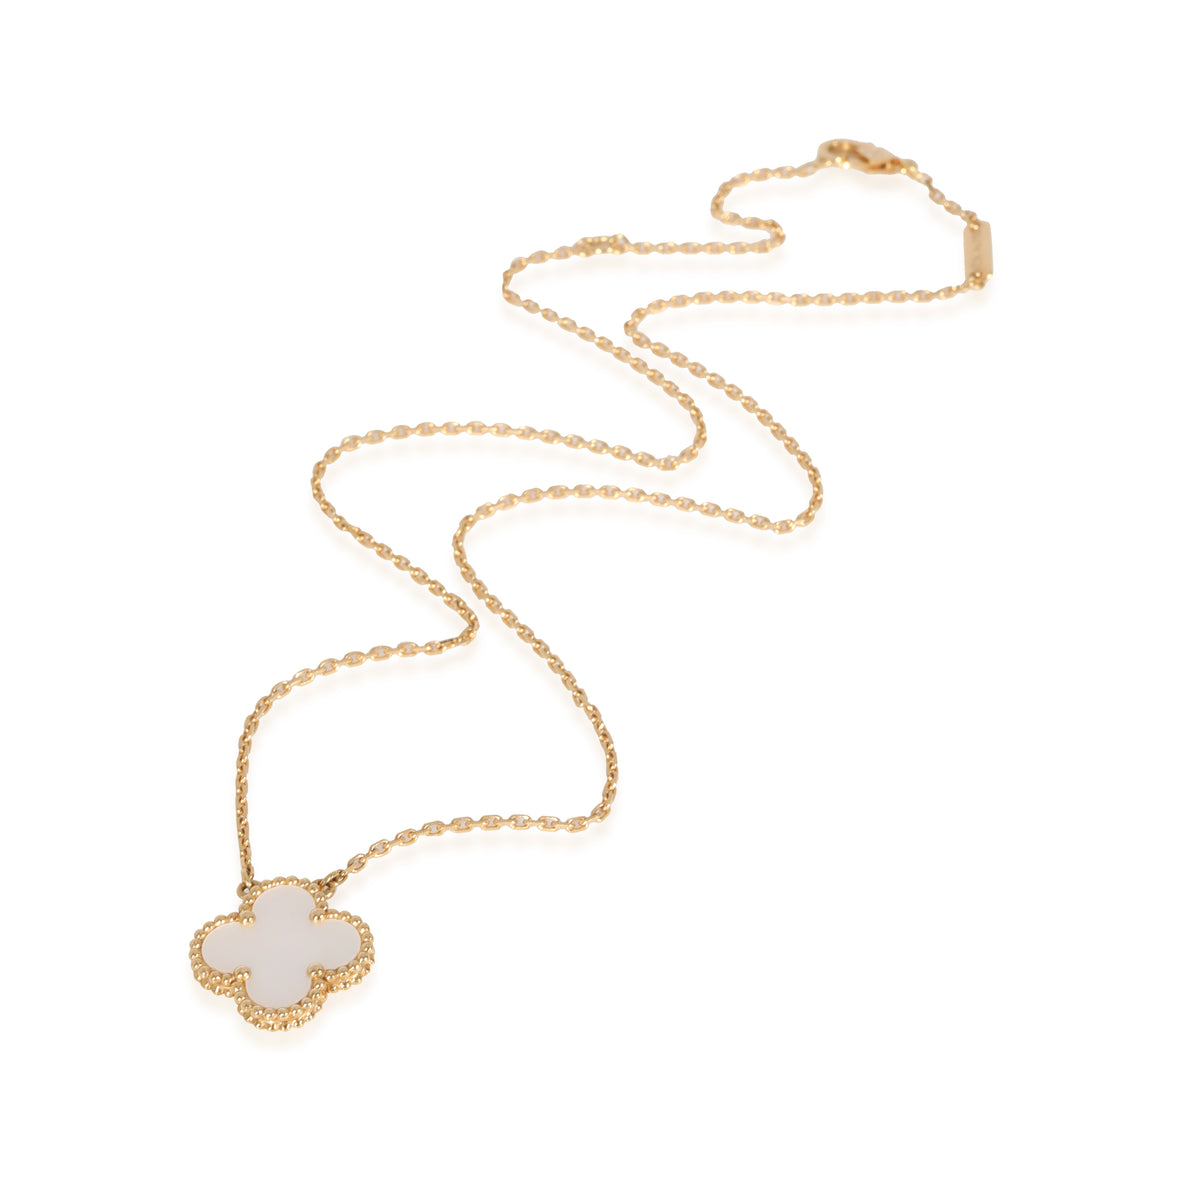 Van Cleef & Arpels Alhambra Mother Of Pearl Necklace in 18k Yellow Gold